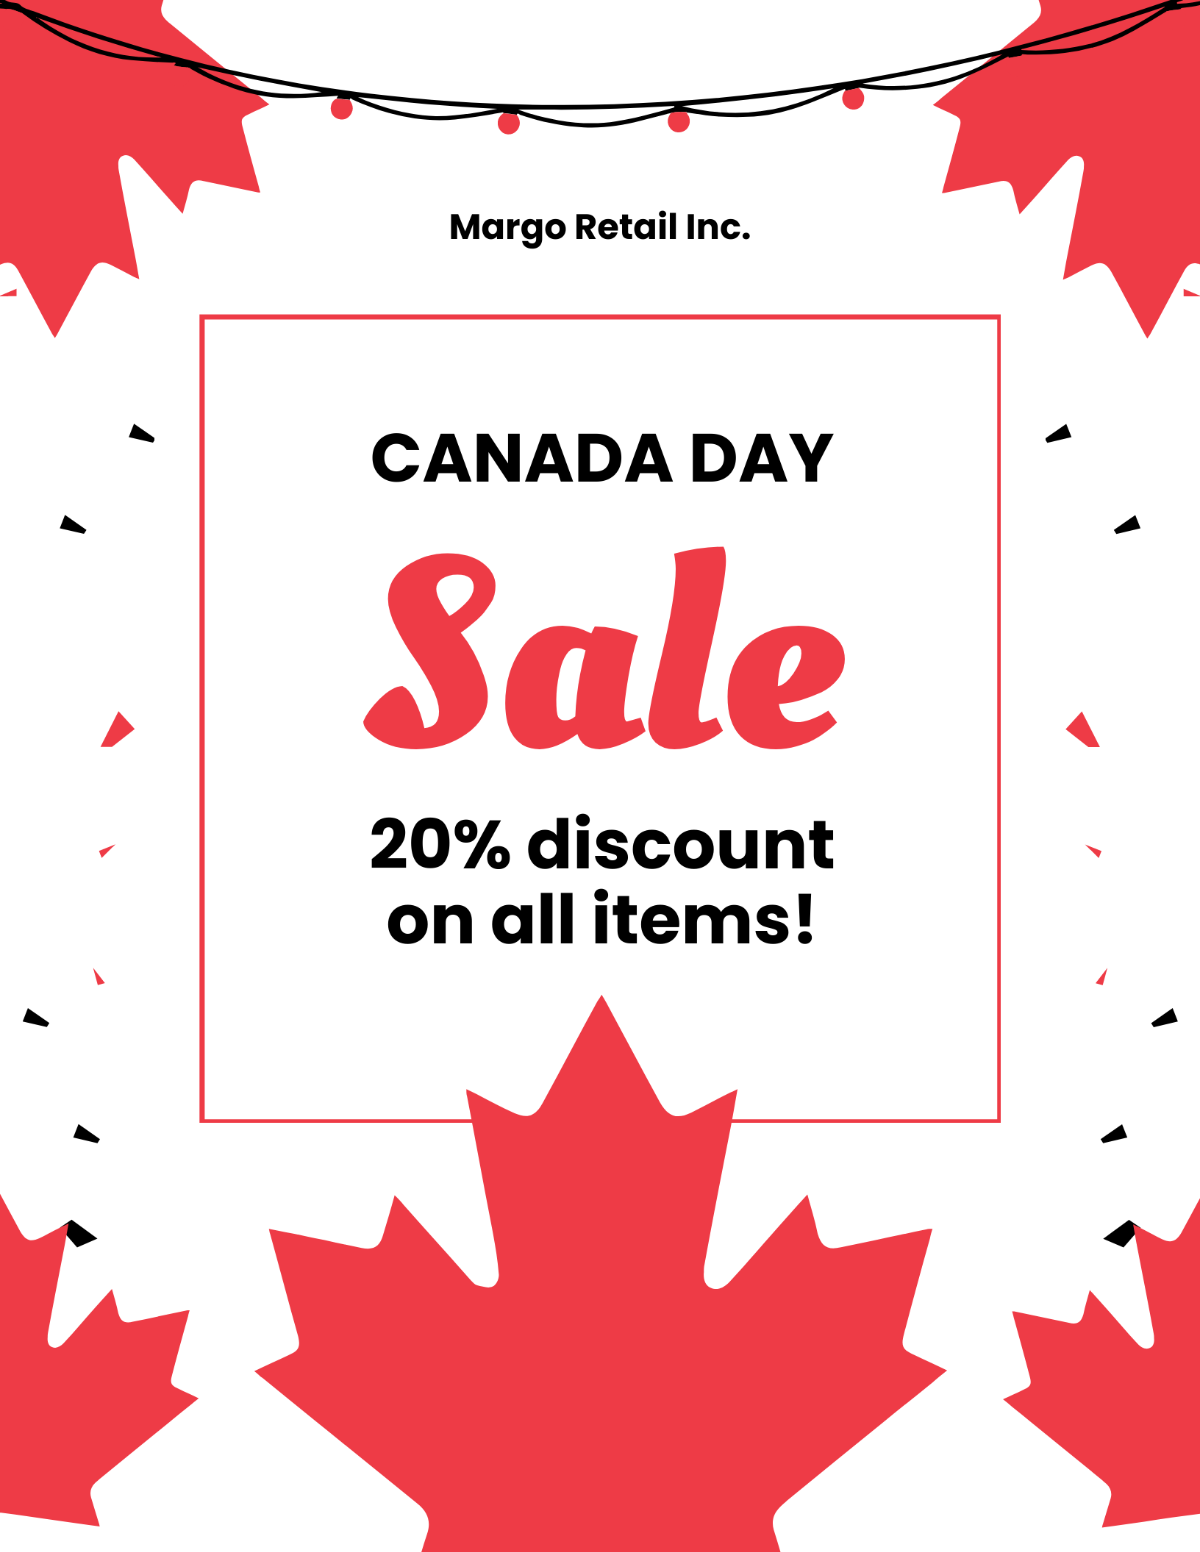 Canada Day Retail Sale Flyer Template